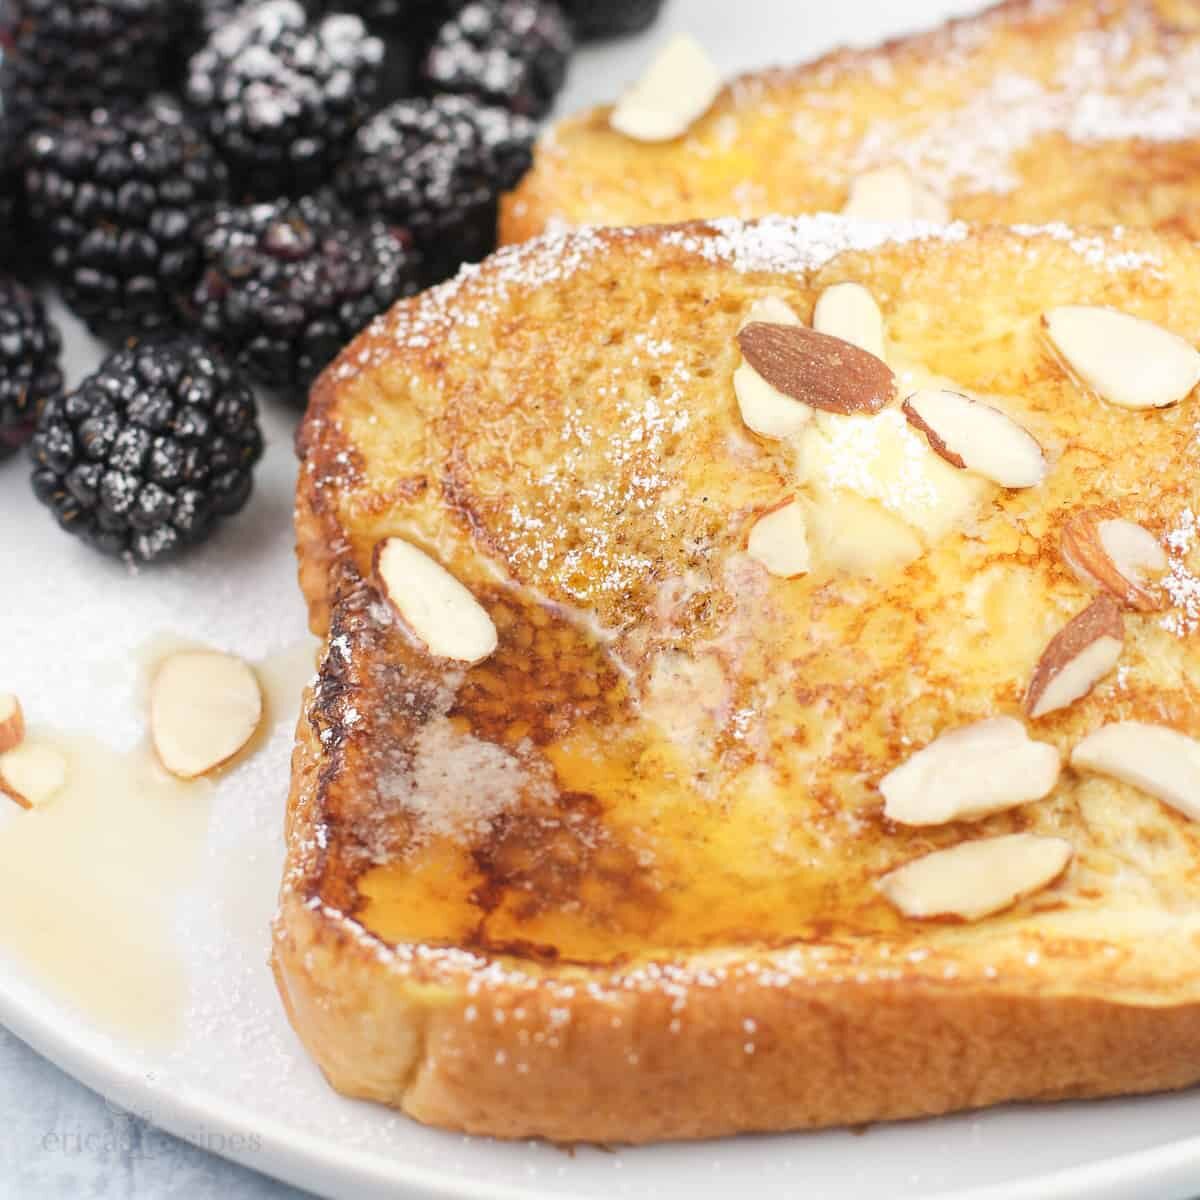 French Toast flavored with amaretto, covered in syrup and topped with sliced almonds.